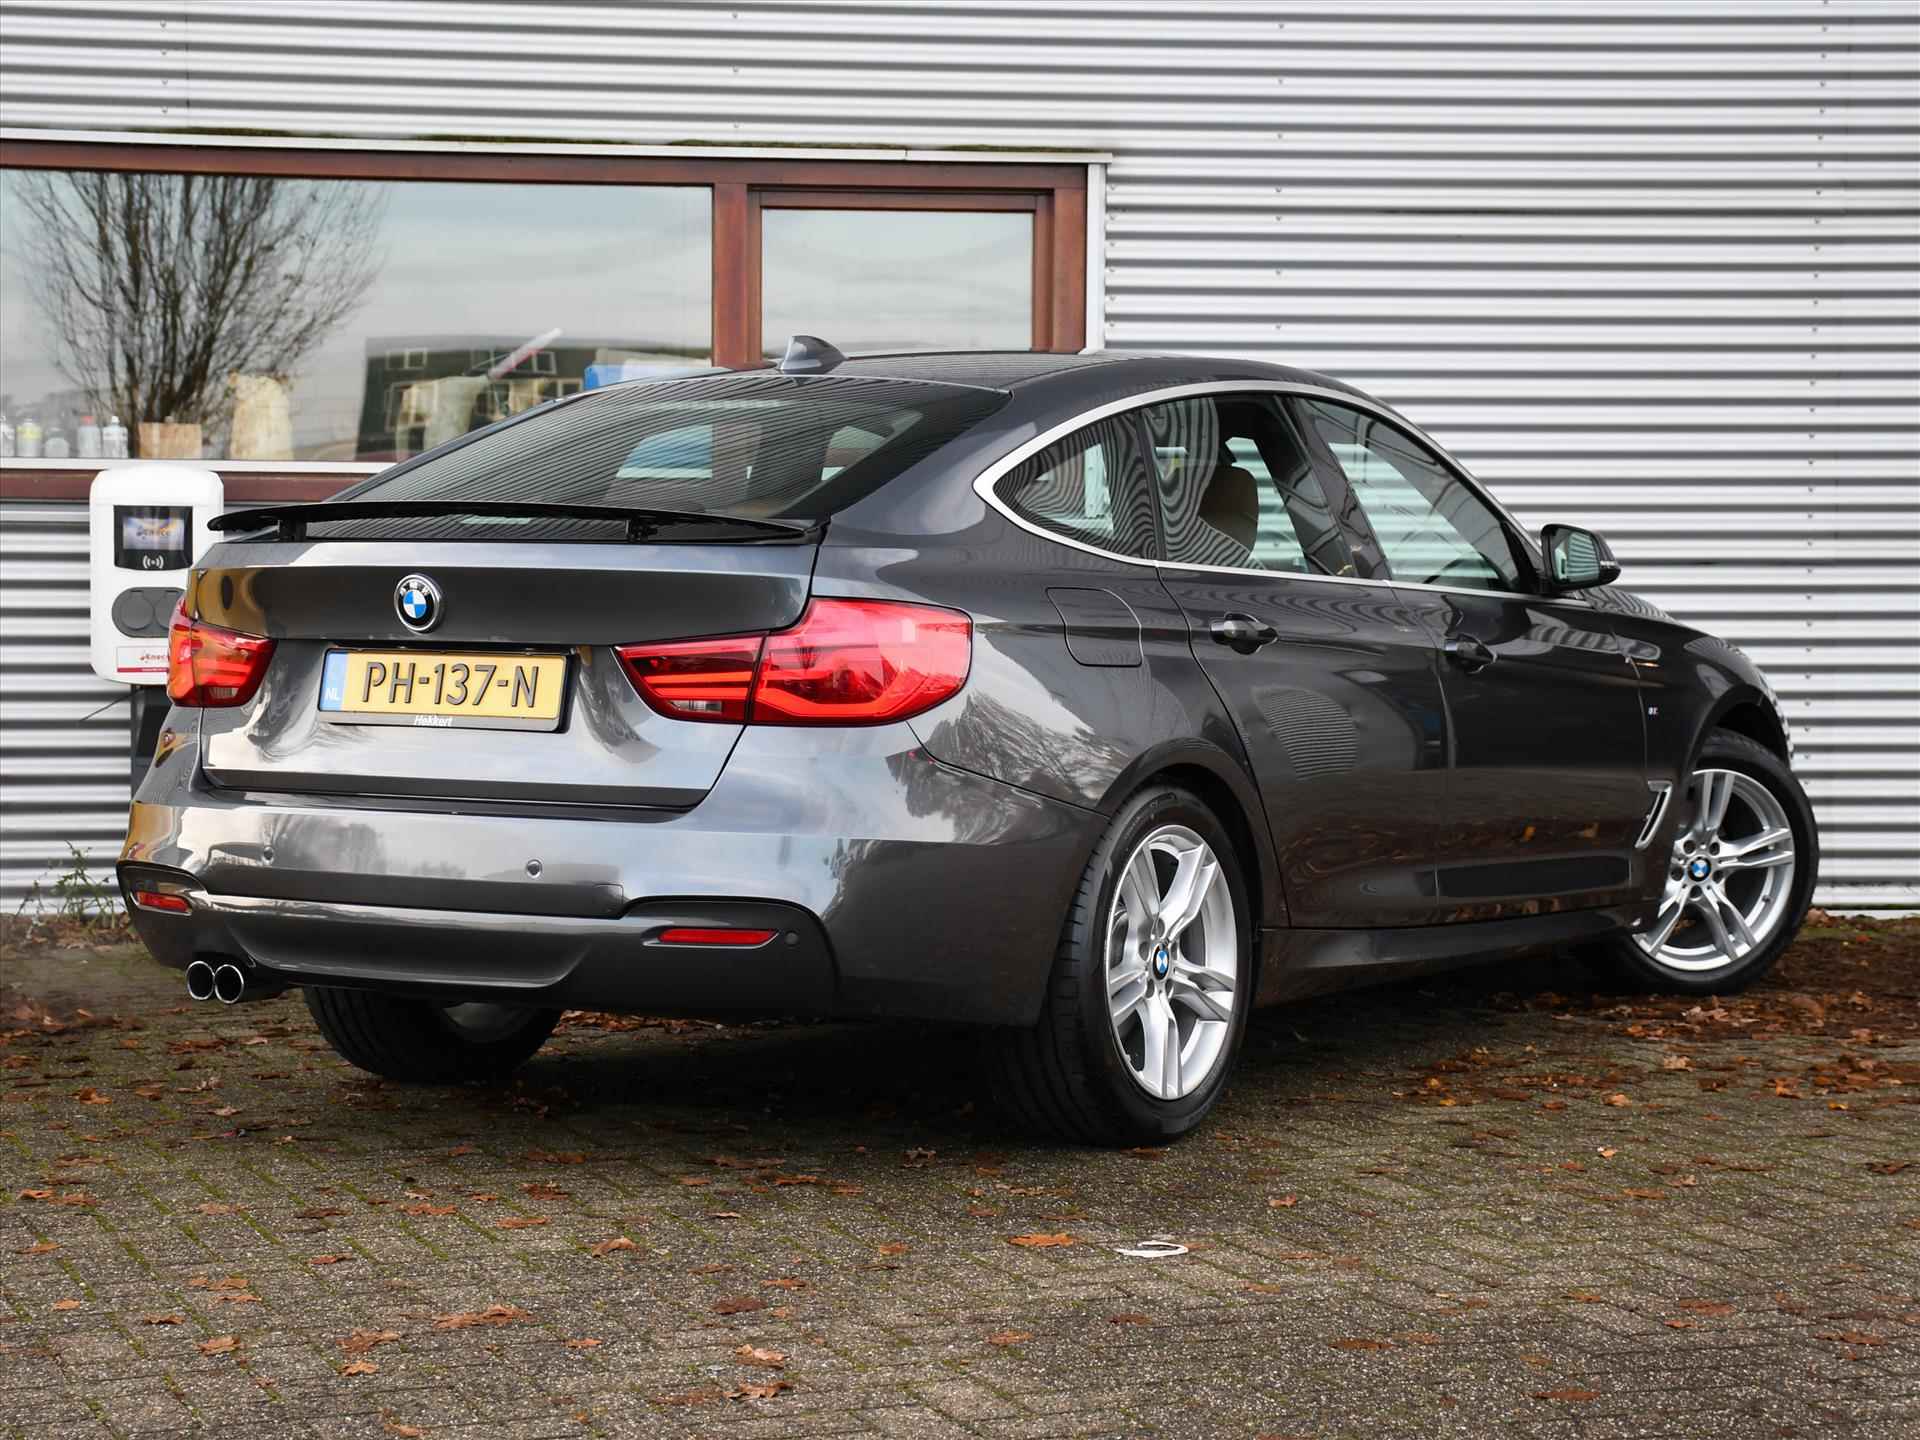 BMW 3-Serie Gran Turismo (f34) 320i High Executive XDrive 184pk Automaat CRUISE.C | PDC | LED | LEDER | 18''LM | NAVI | STOELVERW. VOOR - 4/34